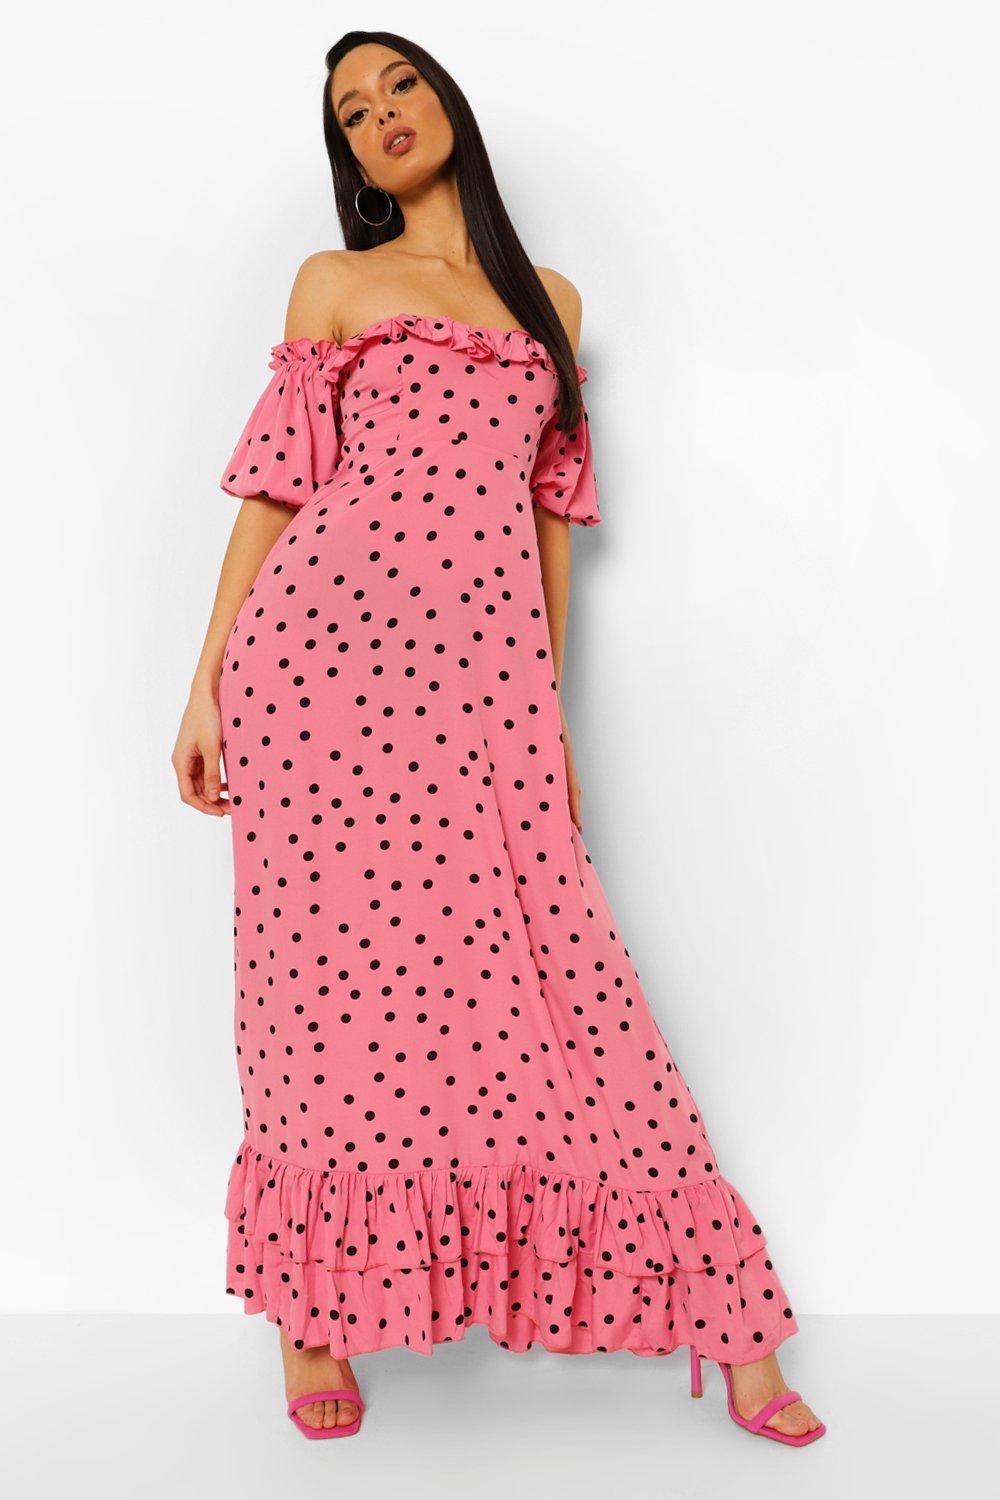 Womens Polka Dot Off The Shoulder Puff Sleeve Maxi Dres Boohoo Women Clothing Dresses Strapless Dresses 4 